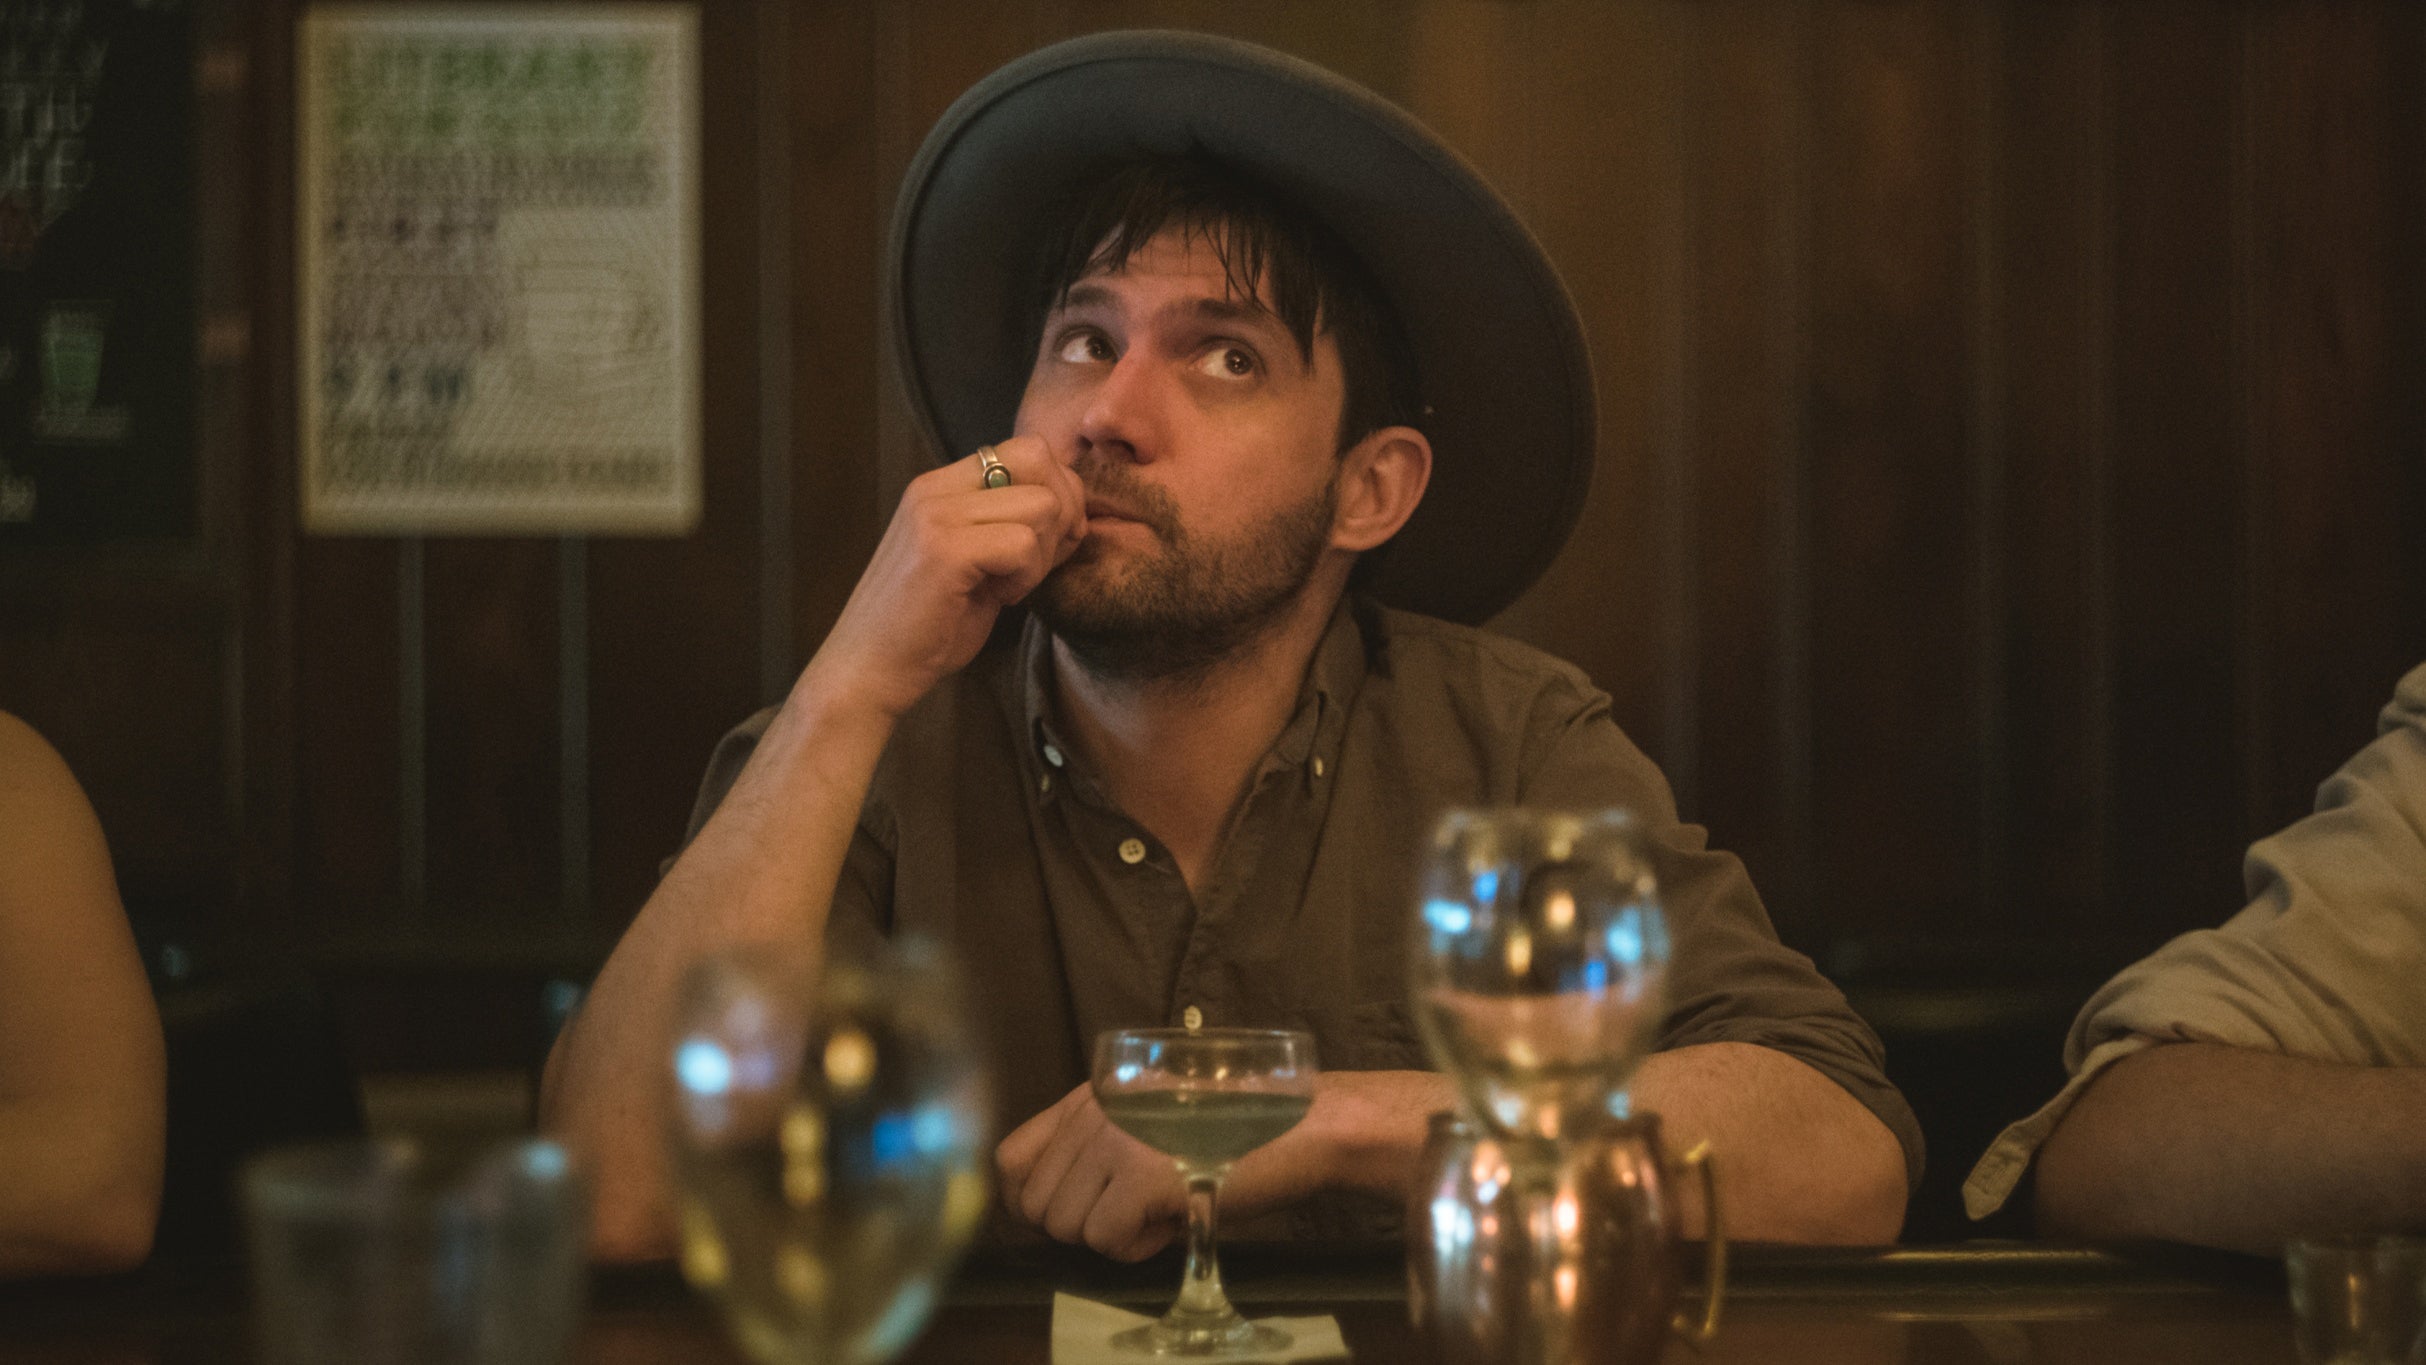 Main image for event titled Conor Oberst and Friends